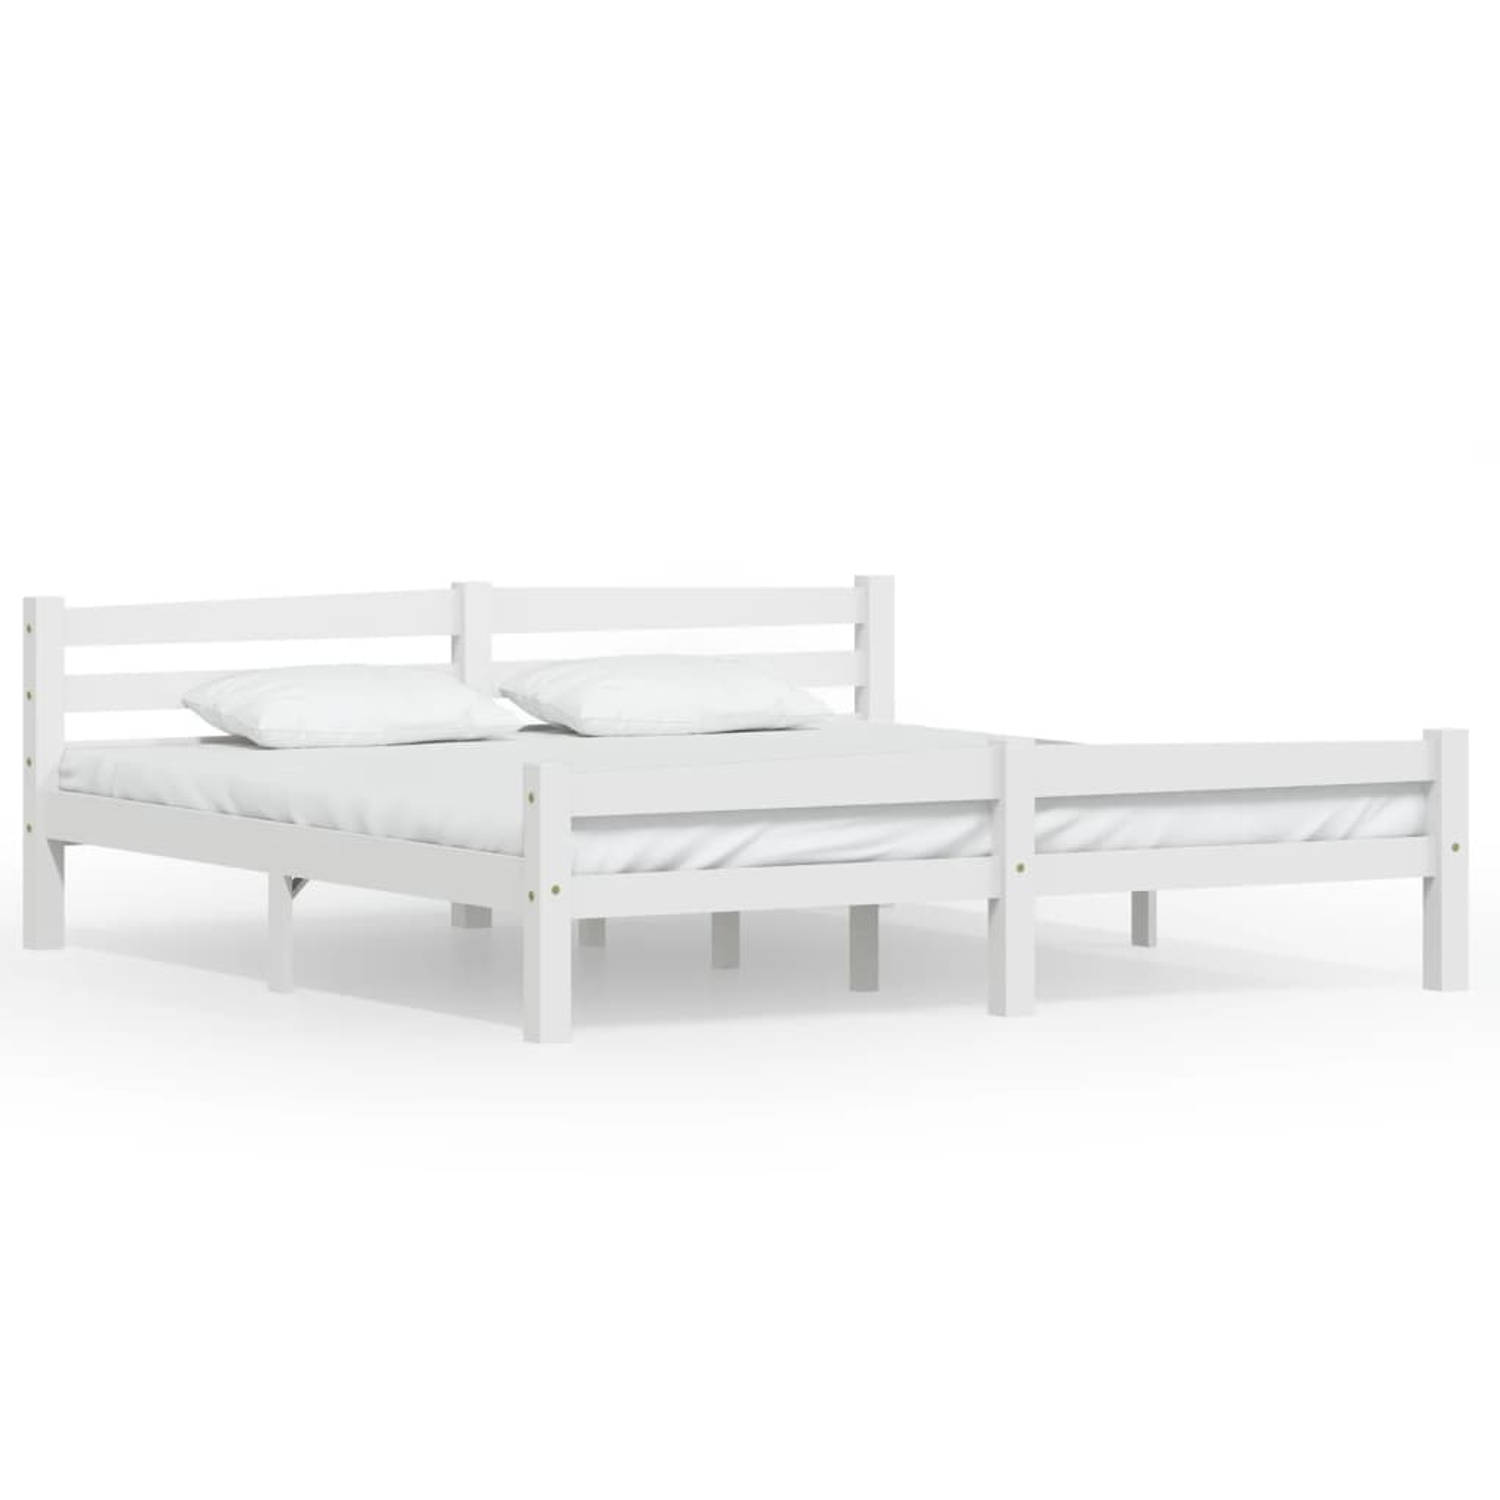 The Living Store Bedframe massief grenenhout wit 180x200 cm - Bedframe - Bedframe - Bed Frame - Bed Frames - Bed - Bedden - 2-persoonsbed - 2-persoonsbedden - Tweepersoons Bed